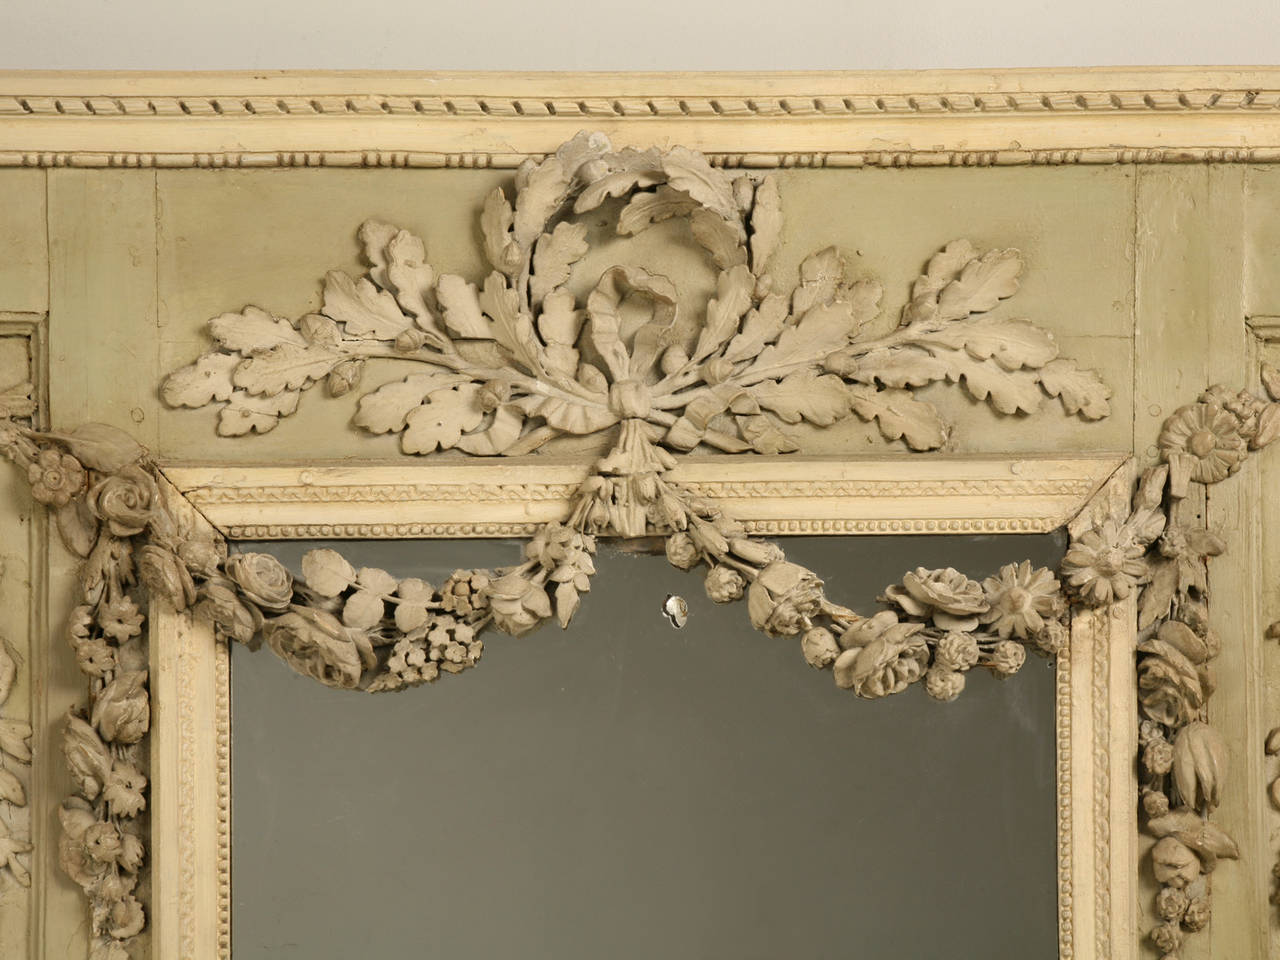 Antique French mirror probably made in the mid-1800s with an ornate and intricate hand-carved relief consisting of urns, floras and leaves. Built-in to an early Parisian apartment. It's muted celadon green and cream colors are calm and soothing,